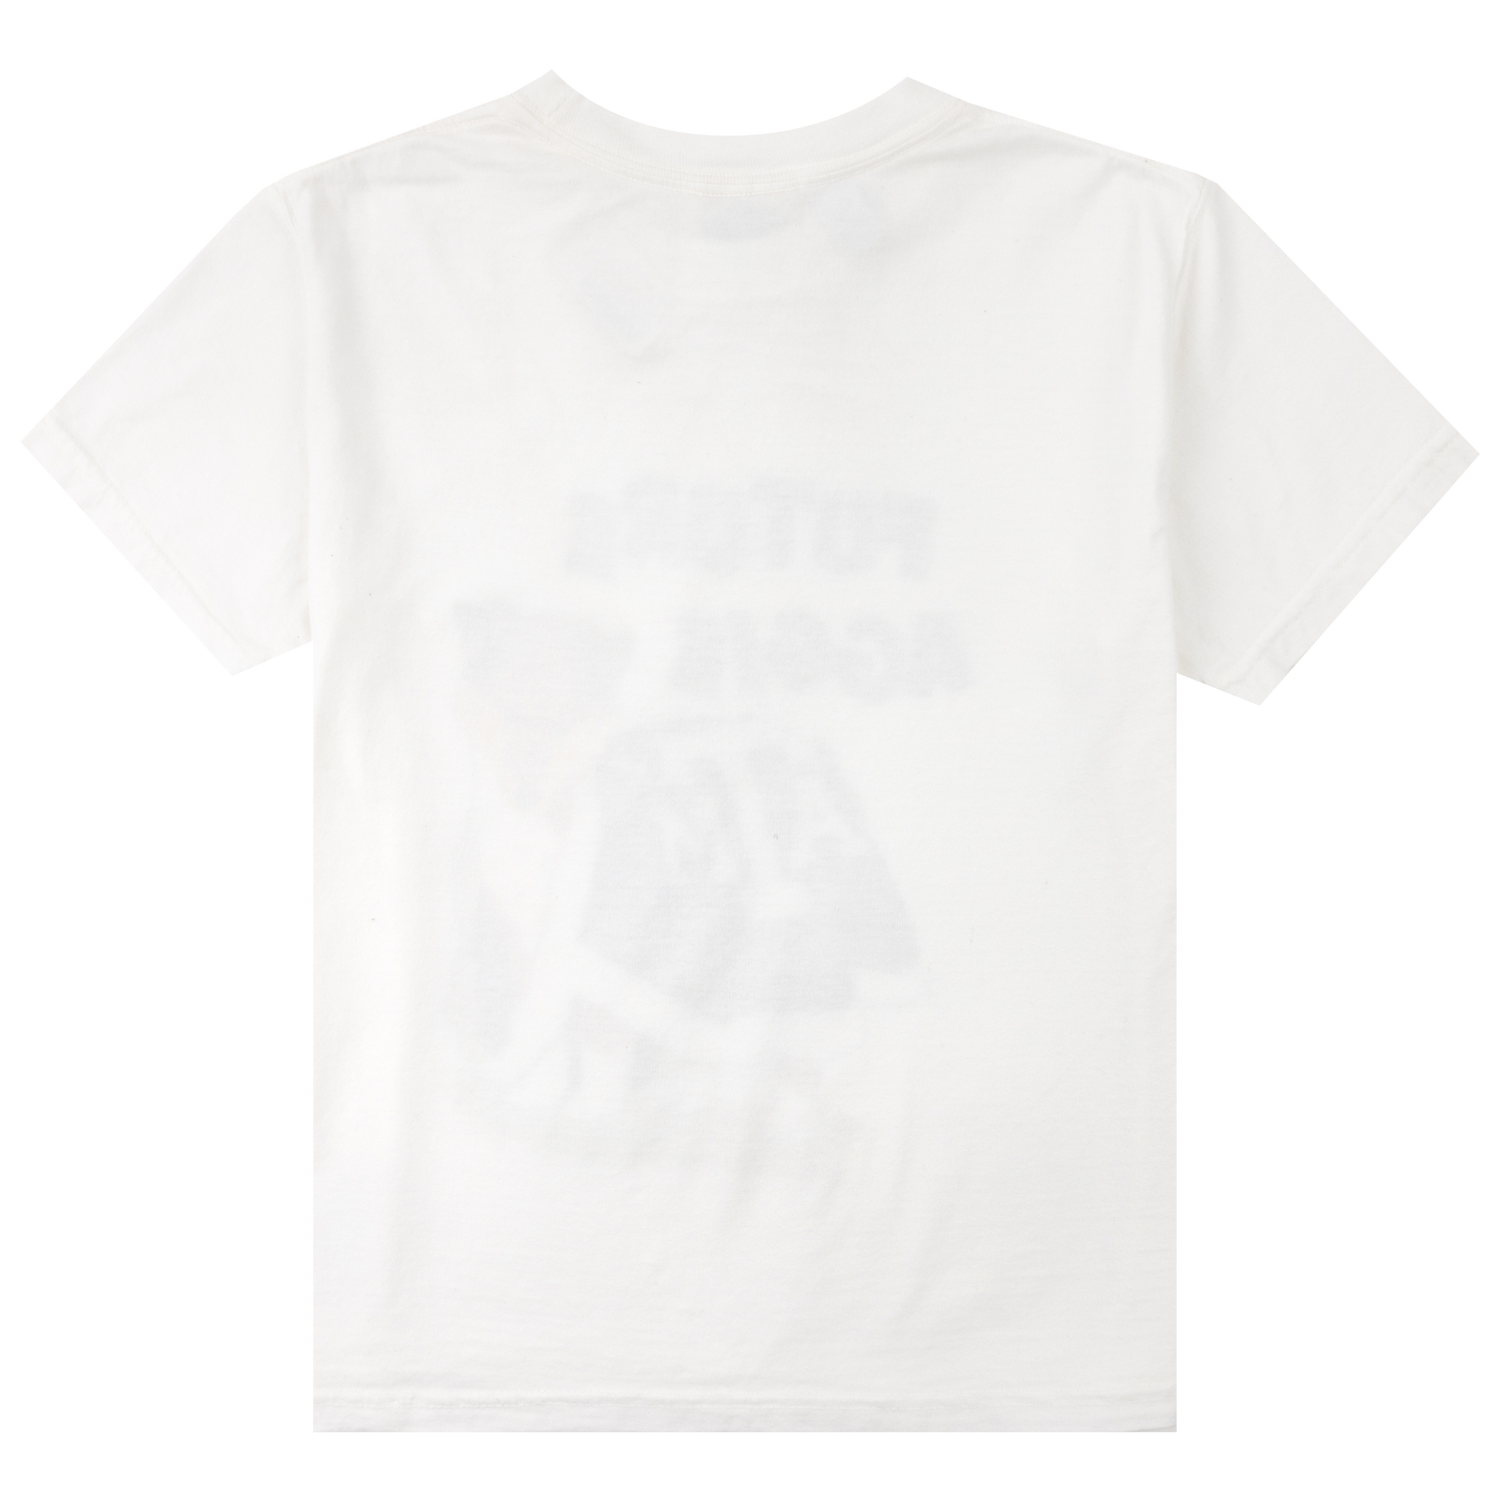 Future Aggie Youth Reveille T-Shirt